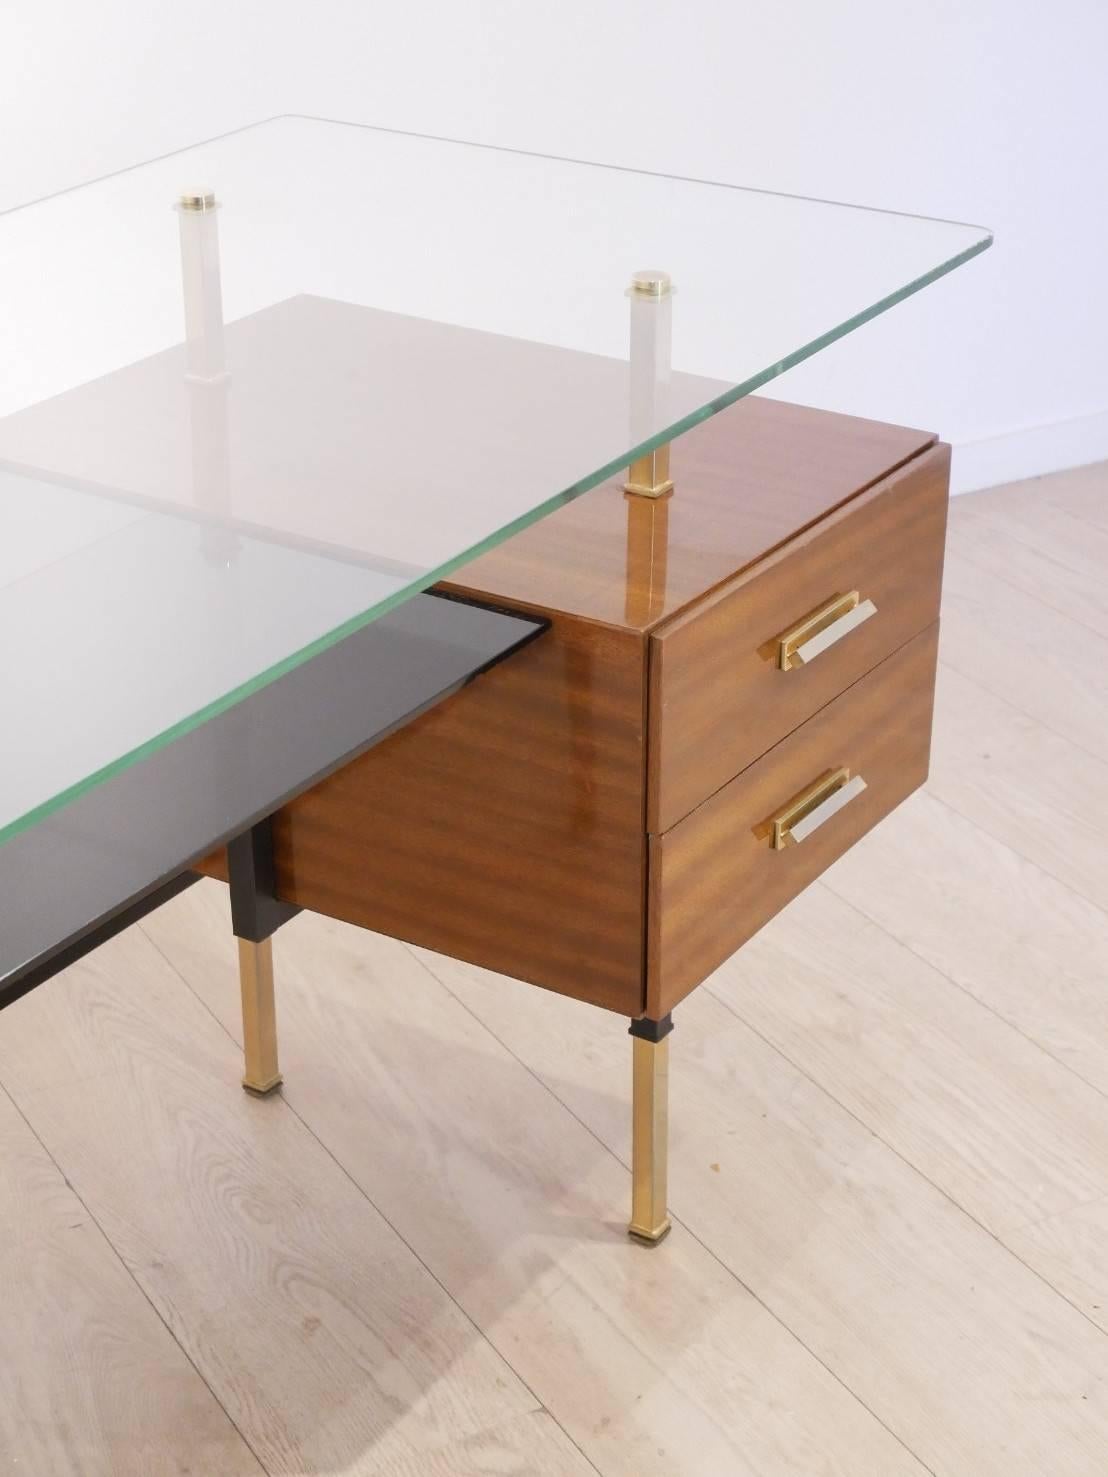 Rare modernist writing desk originating from France / mid 1950s, in the style of R.J Picard, Clear glass top matched with lower black opaline glass tray, shellac side unit in mahogany wood veneer and brass handles. The main structure is composed of